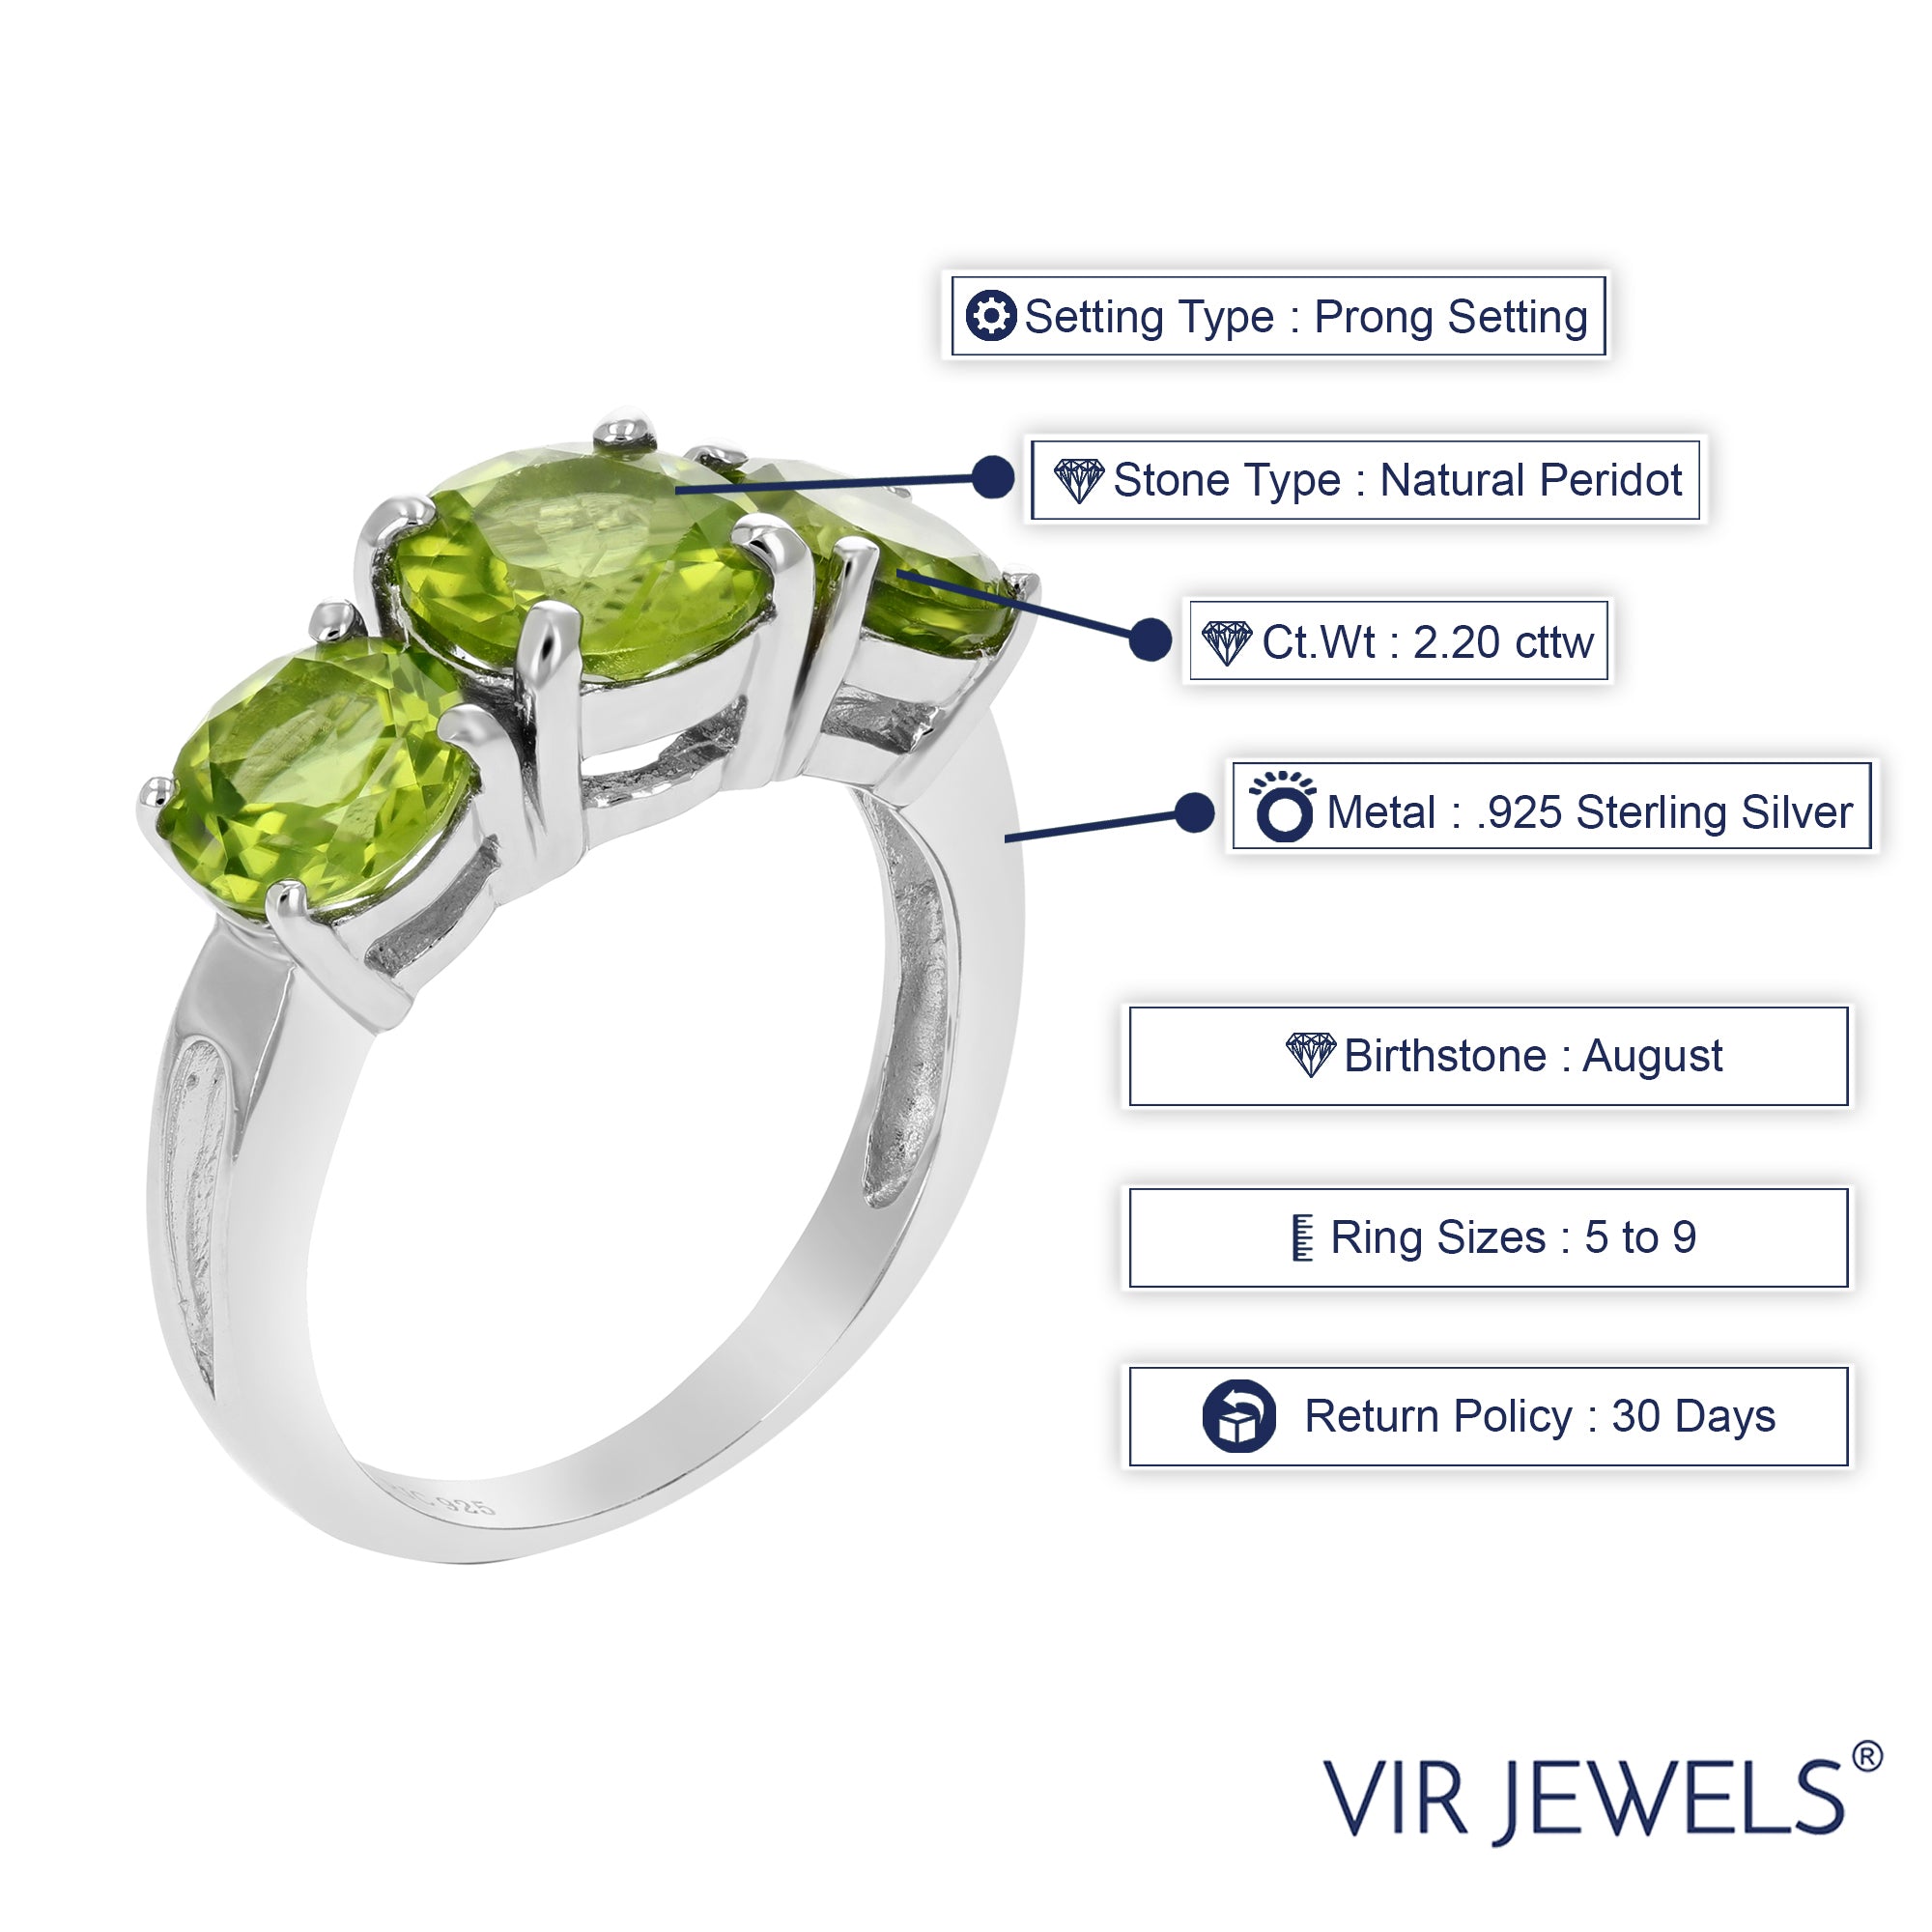 2.20 cttw 3 Stone Peridot Ring .925 Sterling Silver with Rhodium Plating Round